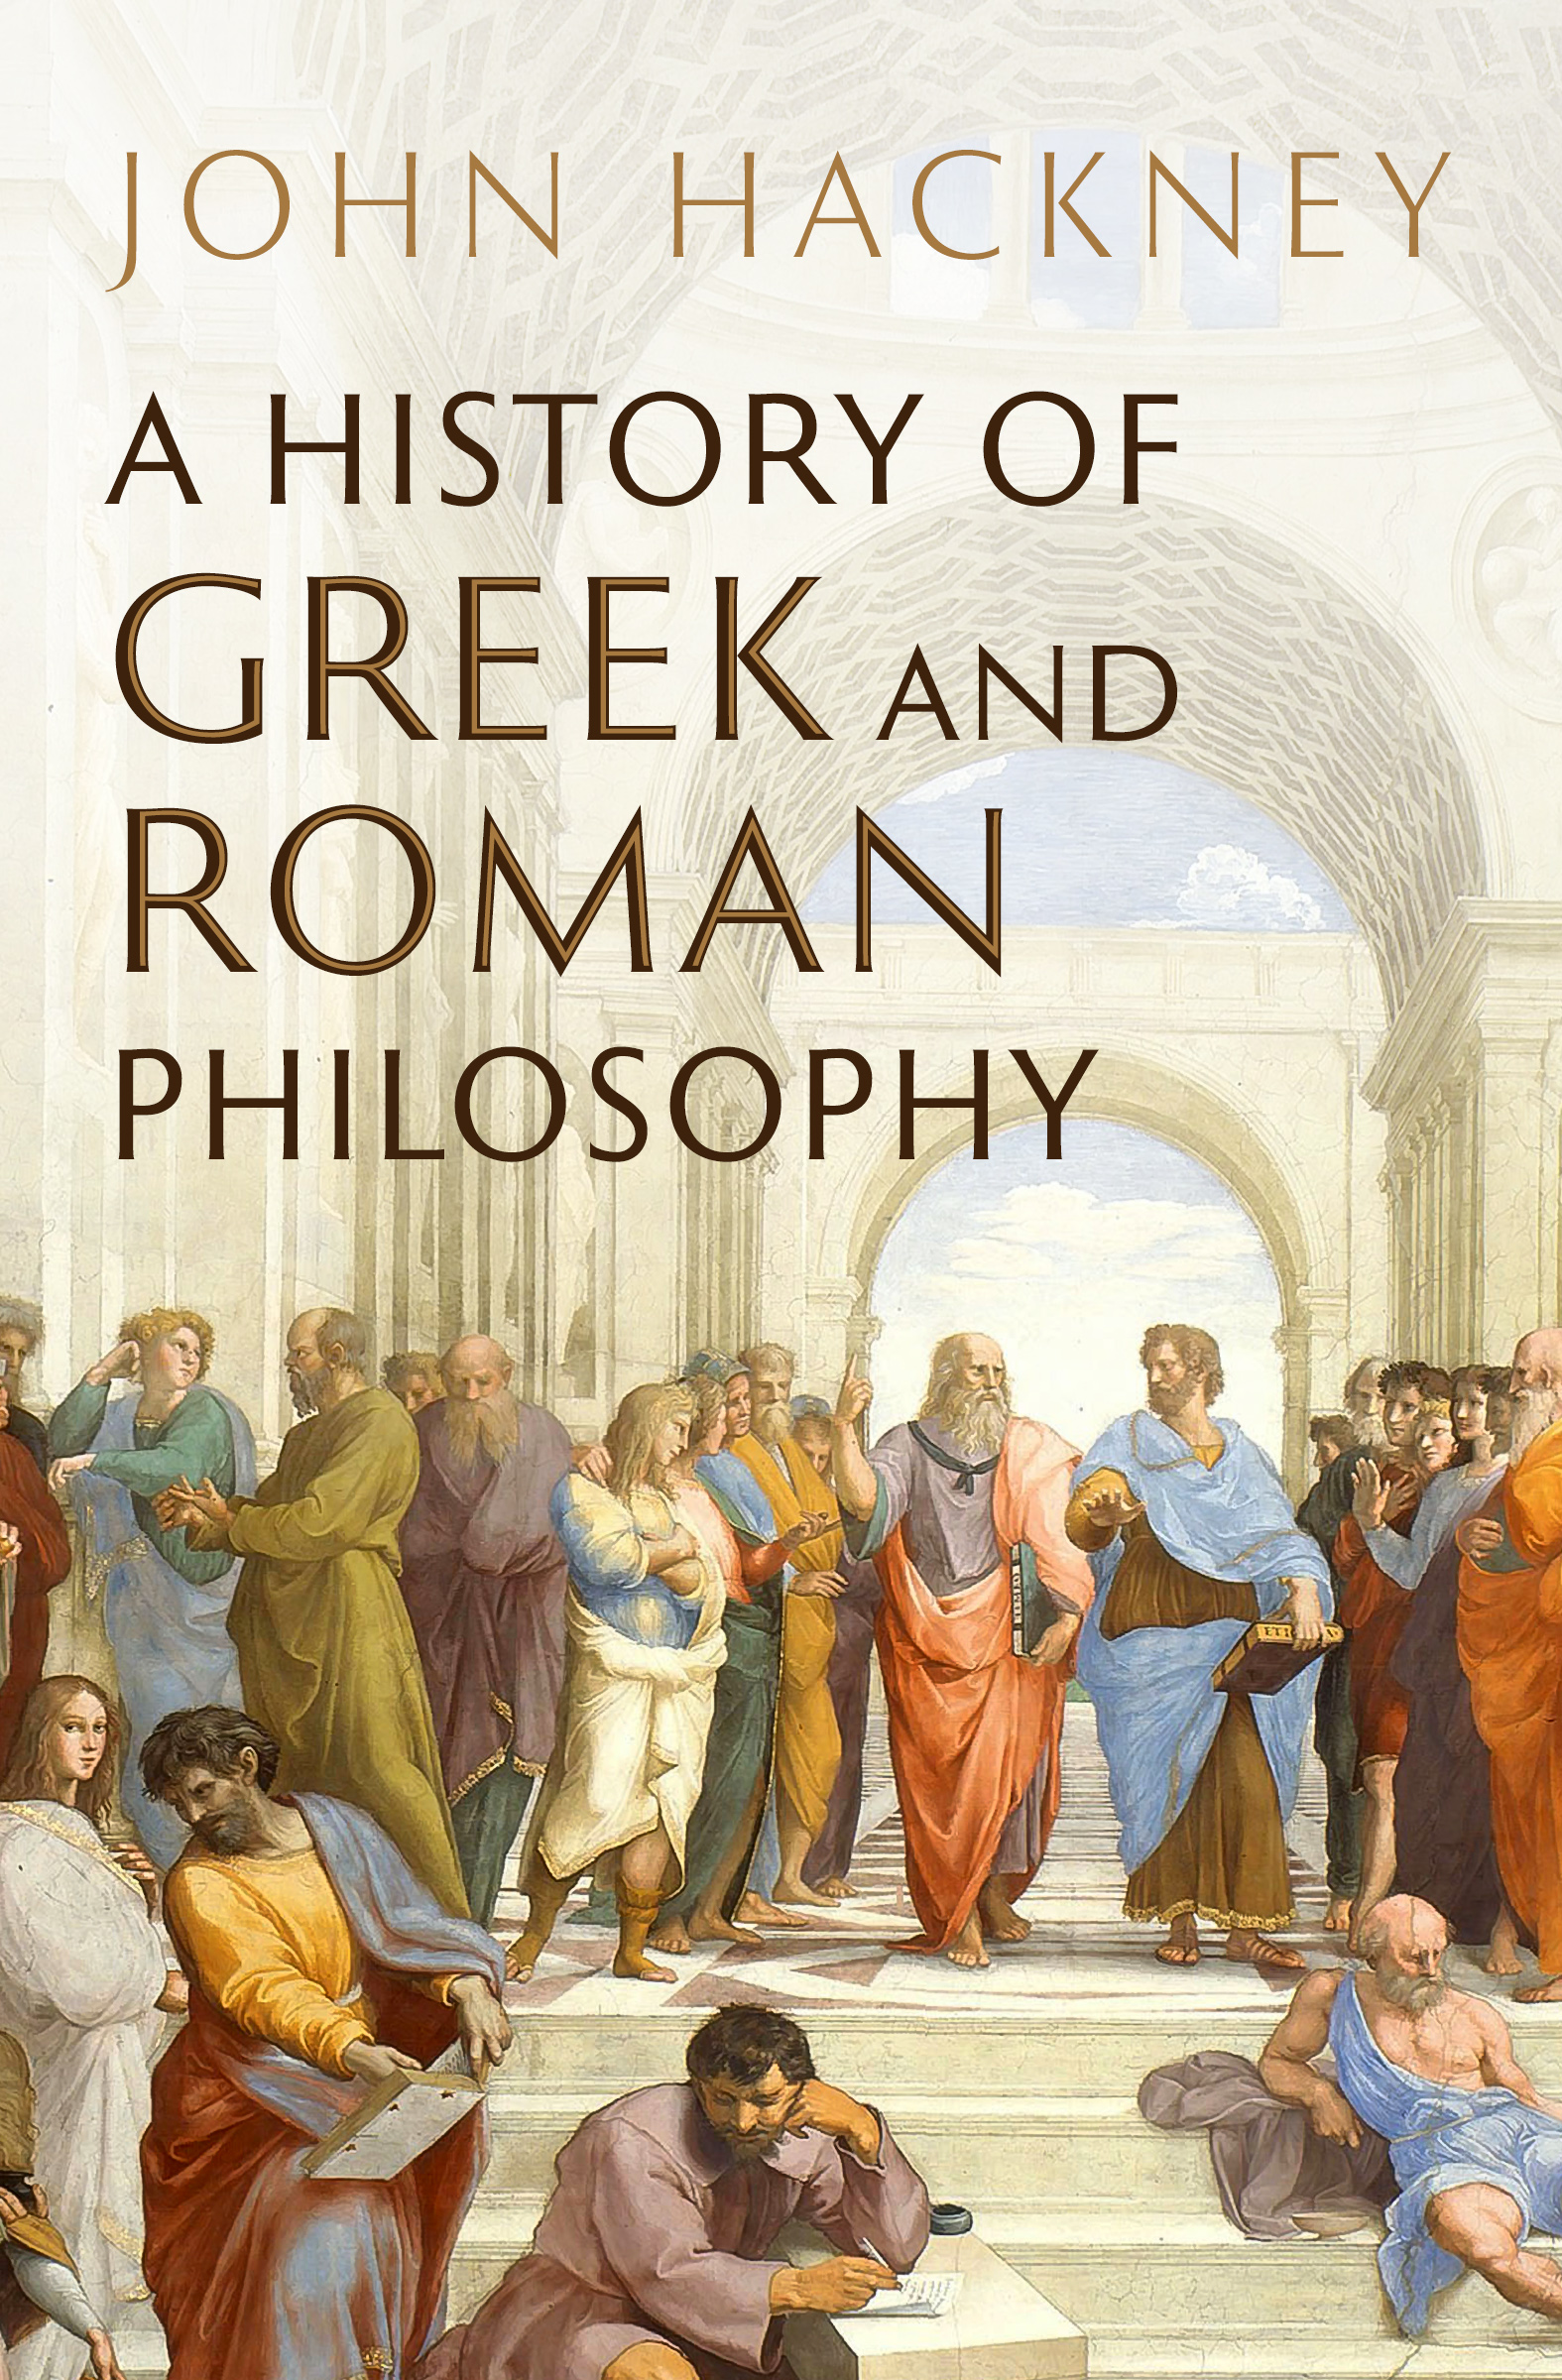 A History of Greek and Roman Philosophy